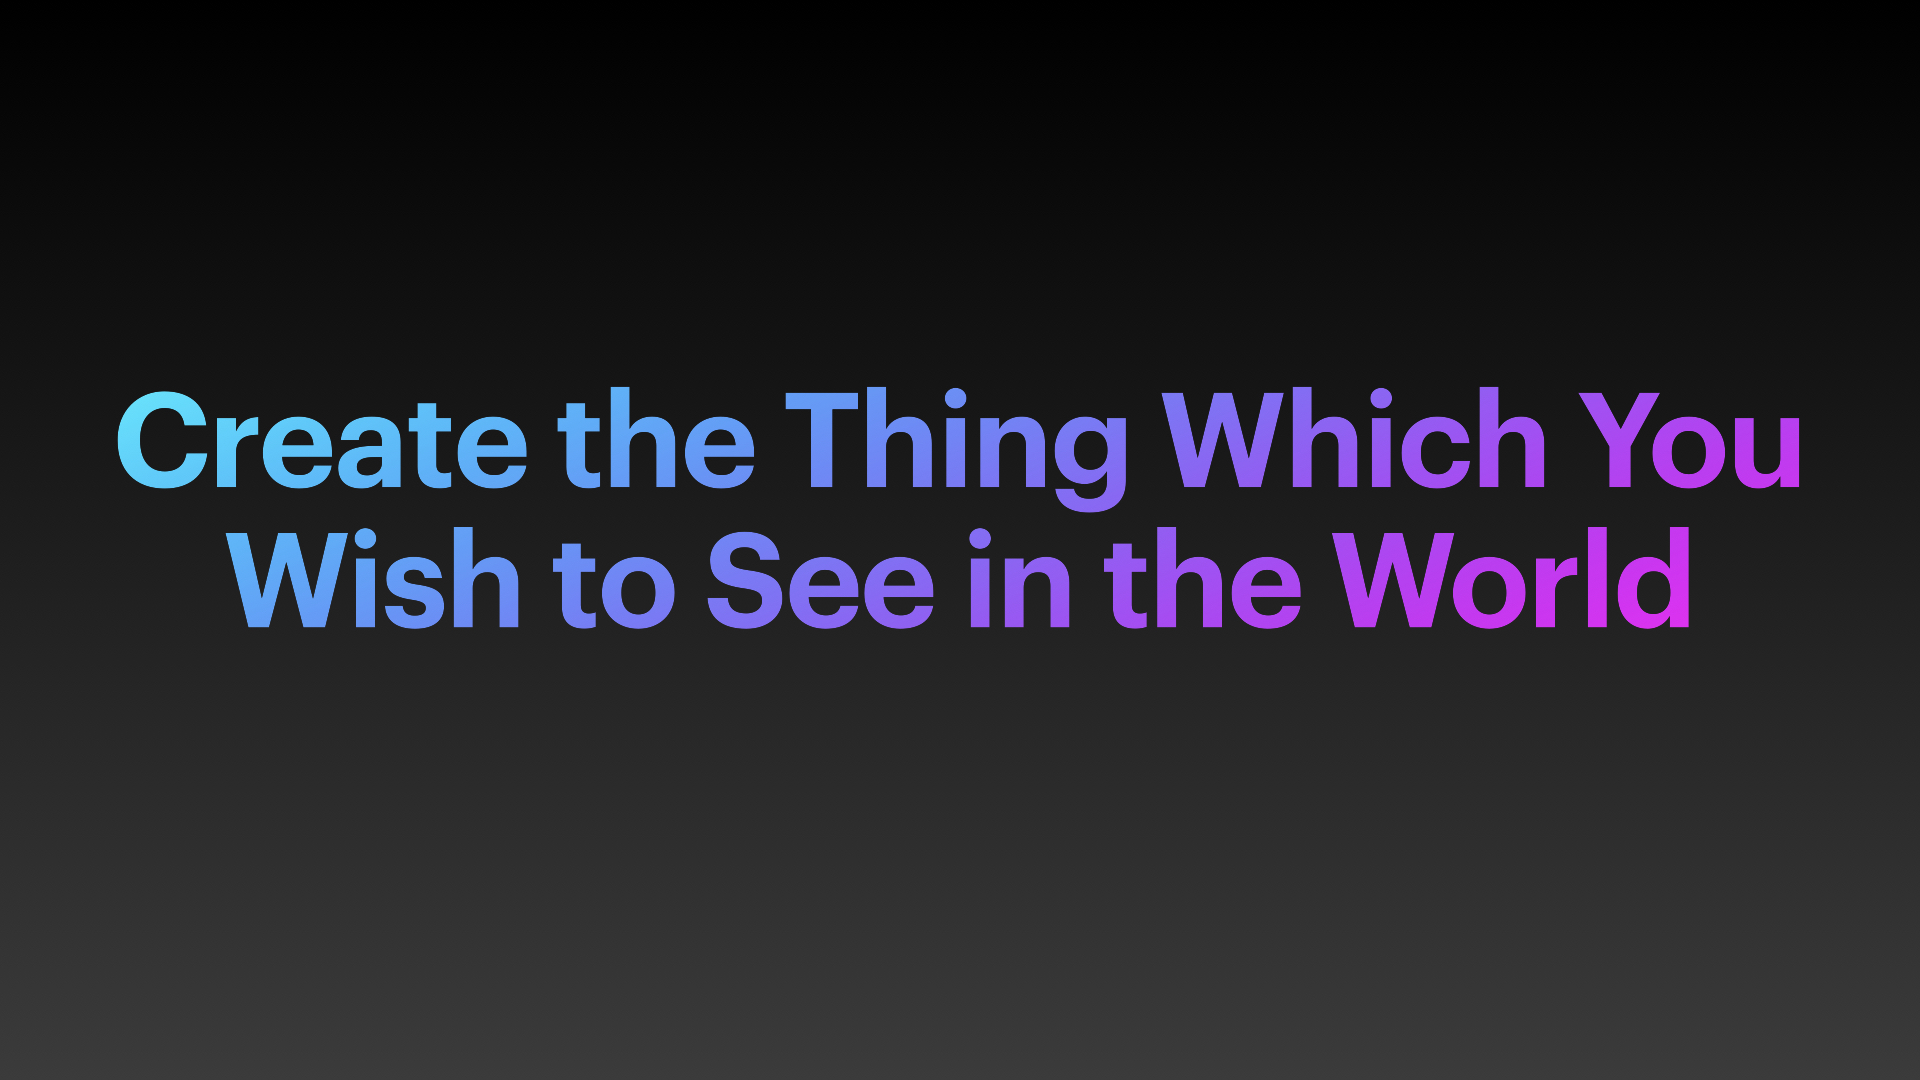 Create the thing which you wish to see in the world